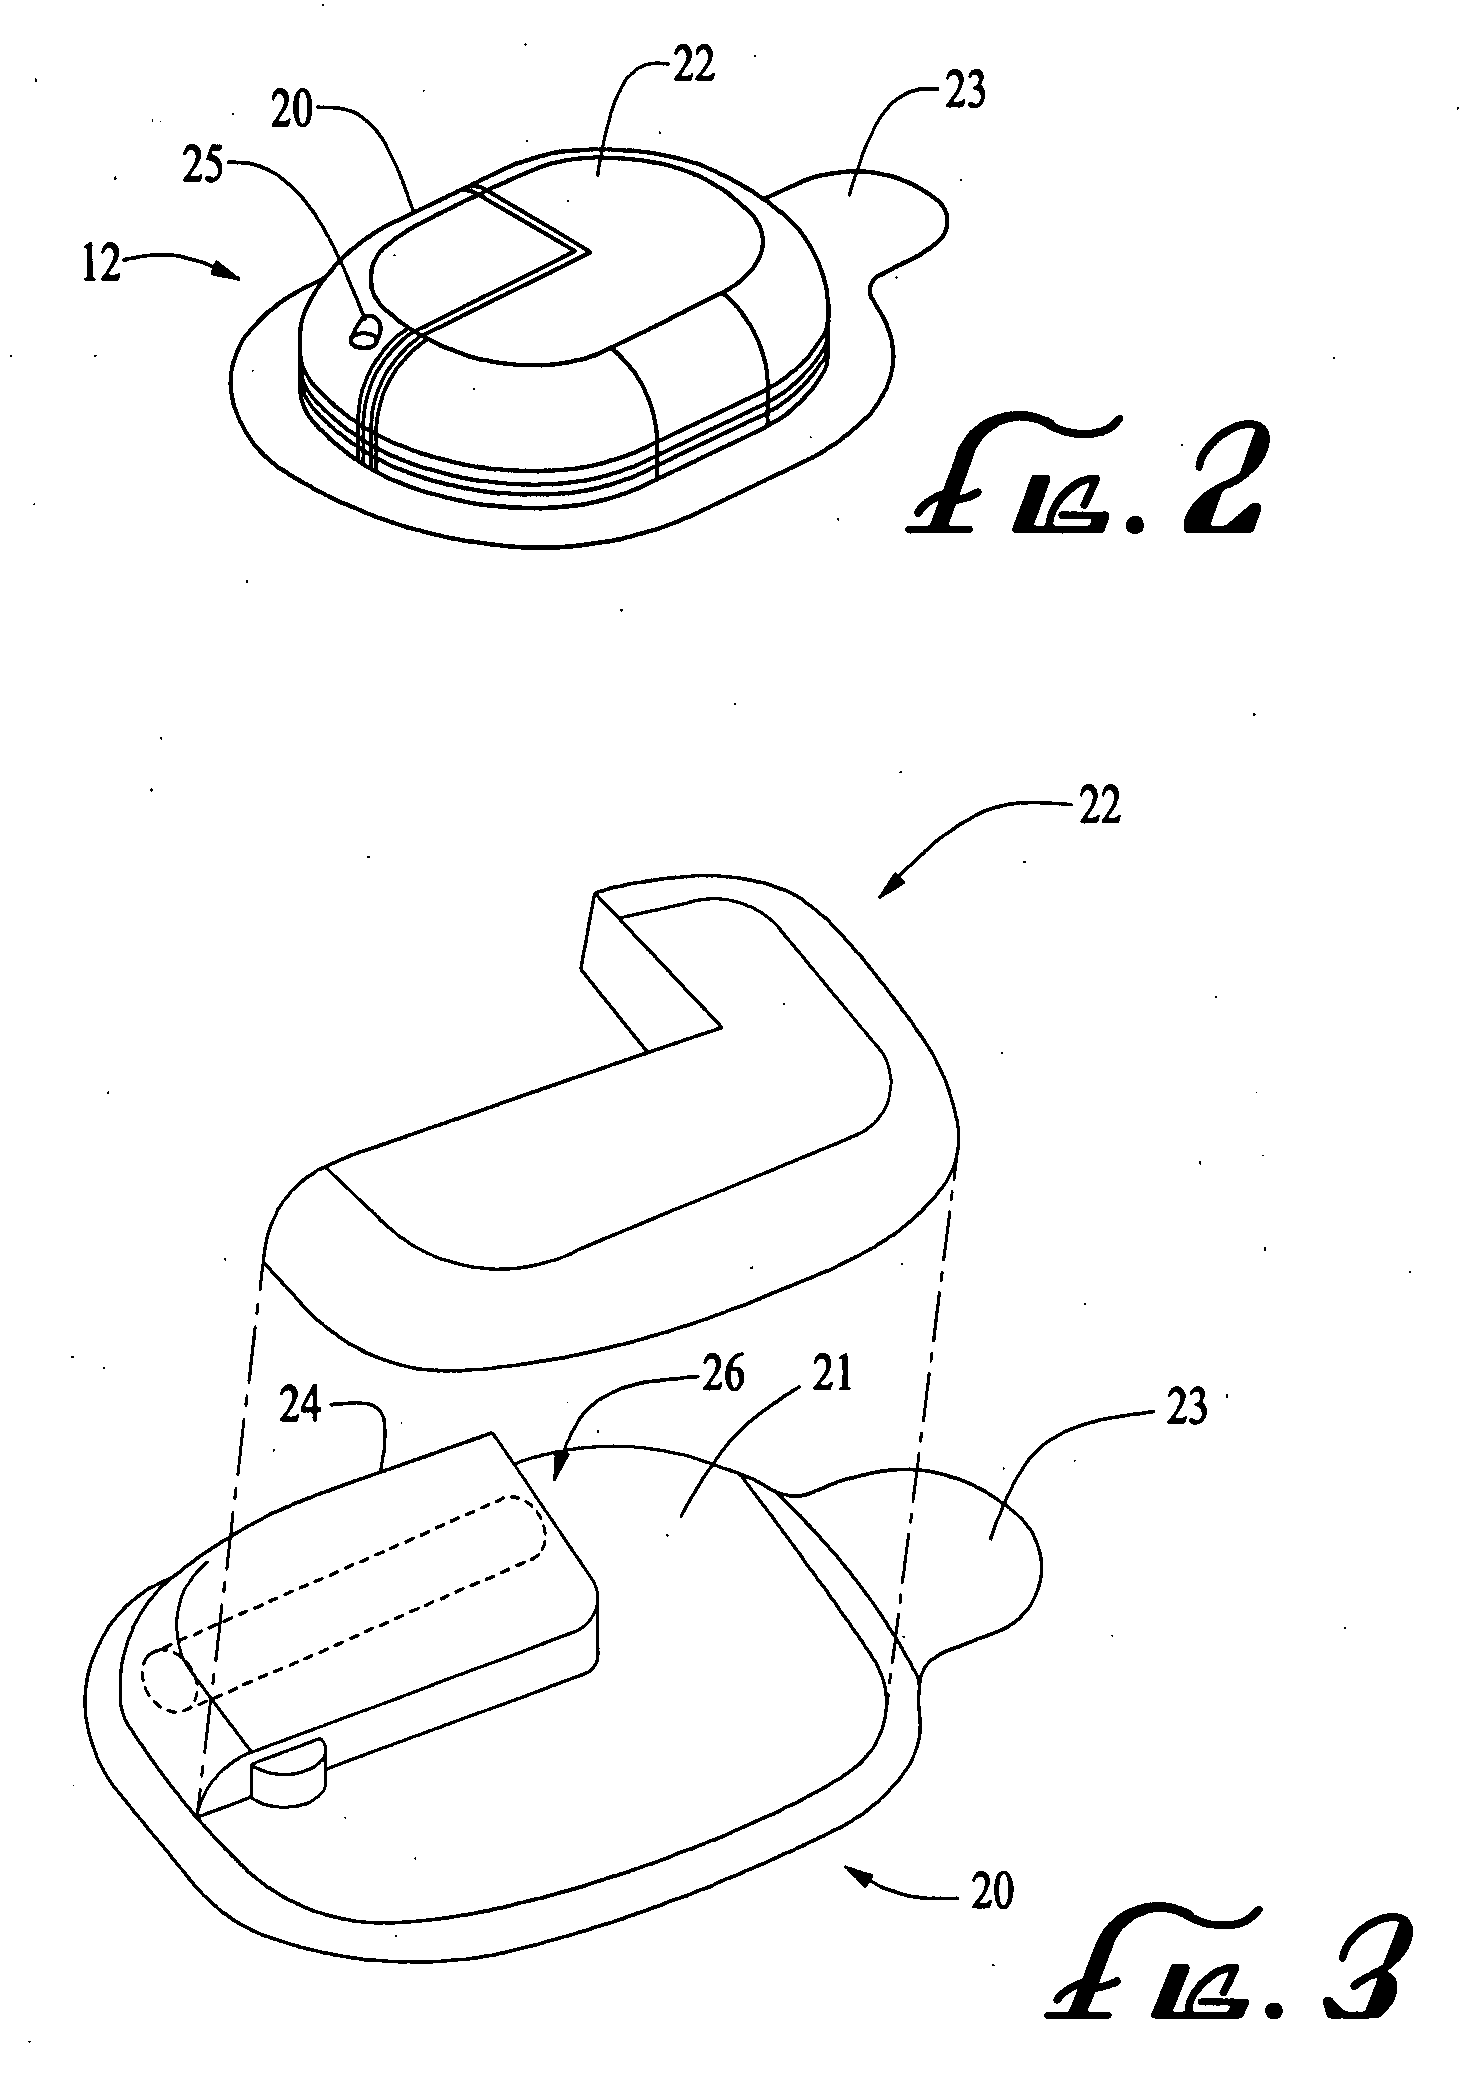 Infusion medium delivery system, device and method with needle inserter and needle inserter device and method